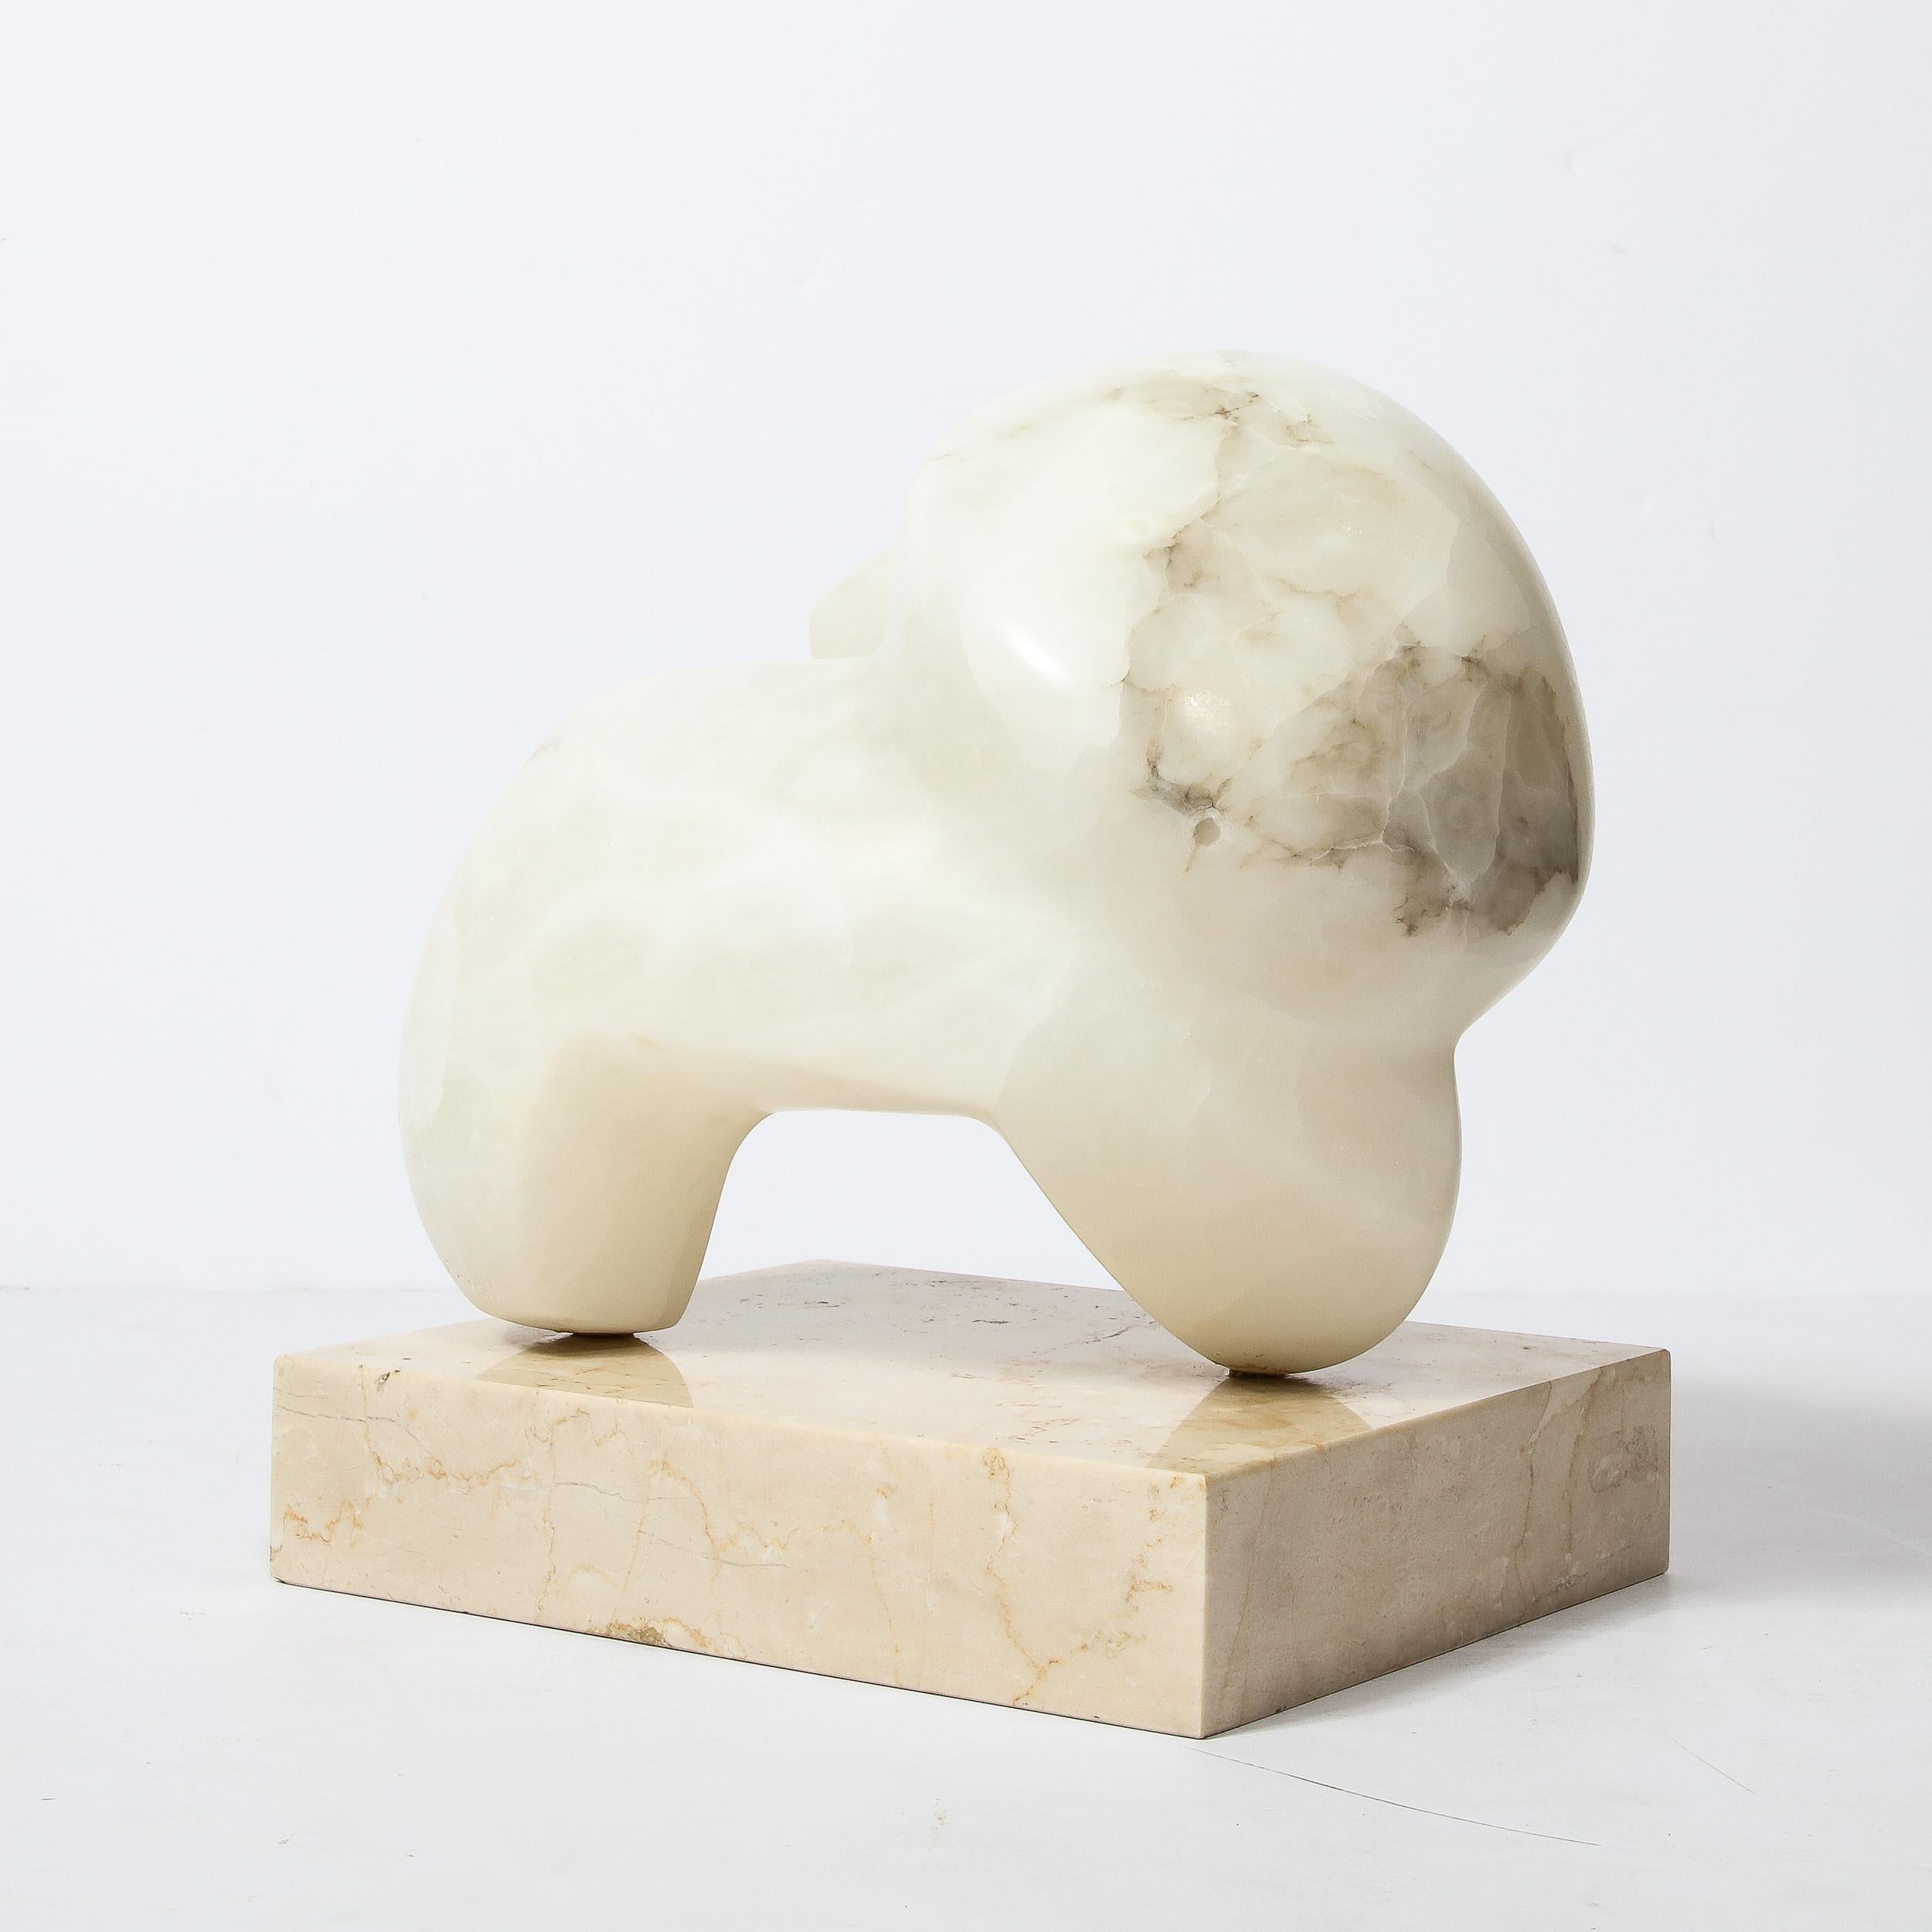 American Mid-Century Abstracted Alabaster Organic Sculpture signed by Julie Small Gambly